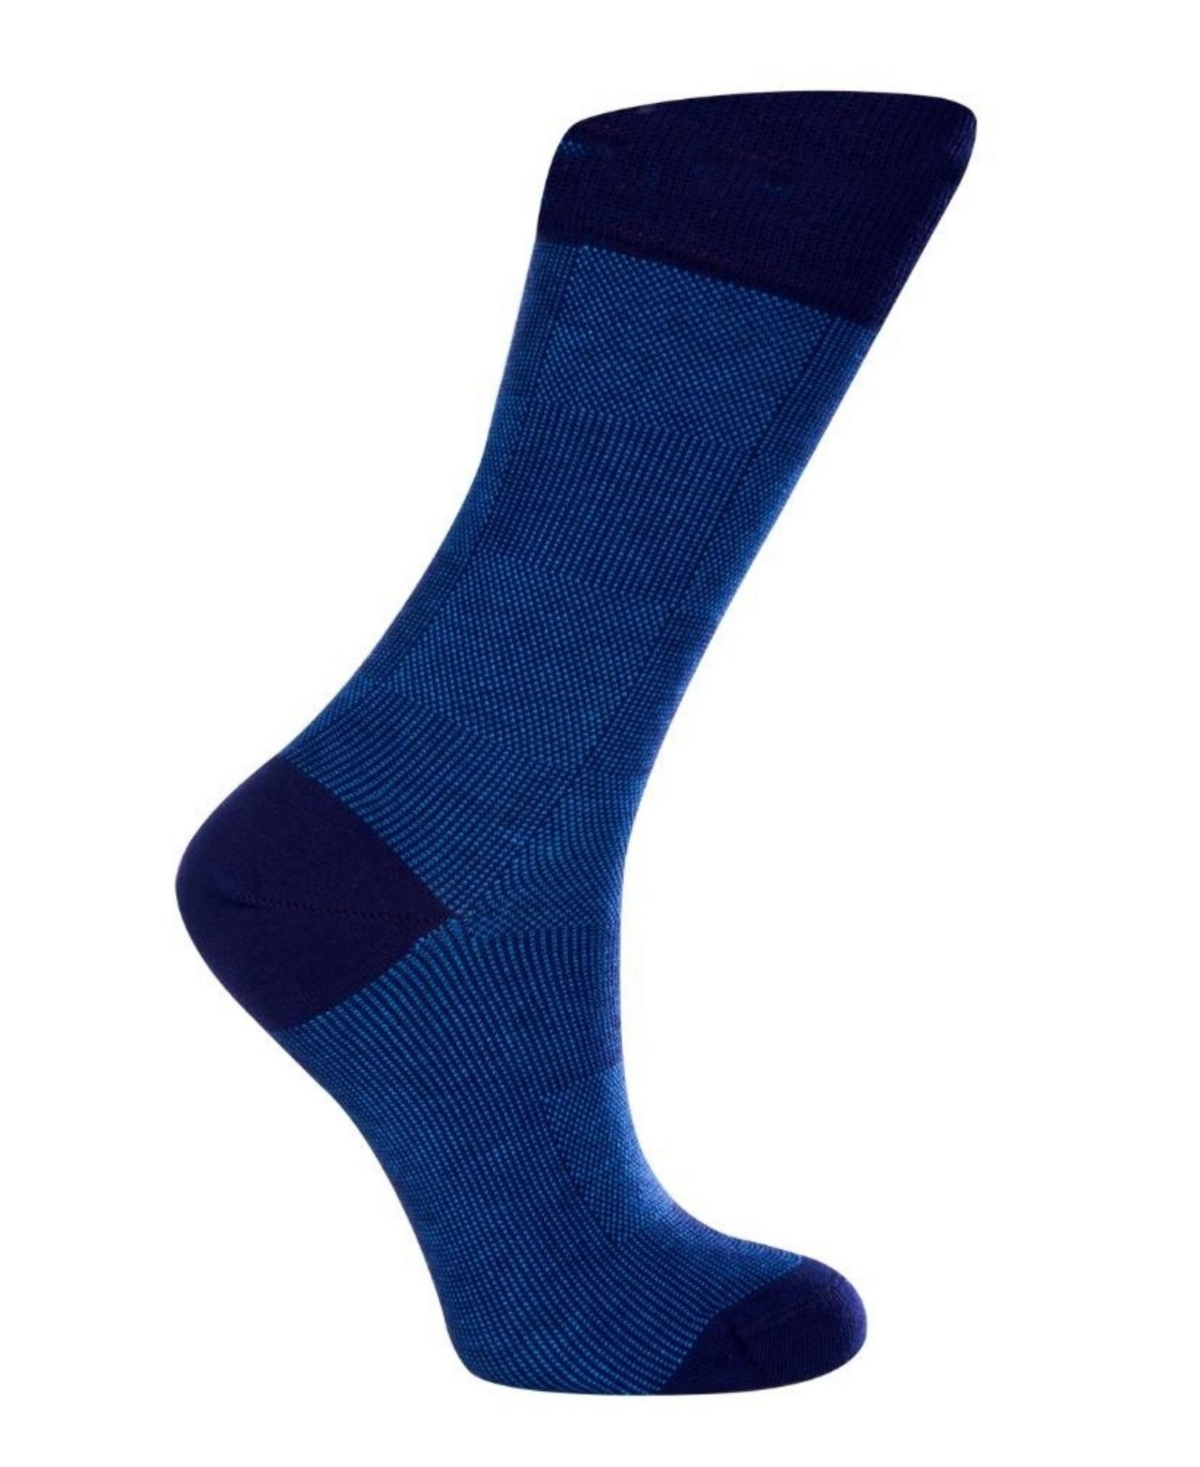 Women's Checkers W-Cotton Dress Socks with Seamless Toe Design, Pack of 1 - Blue